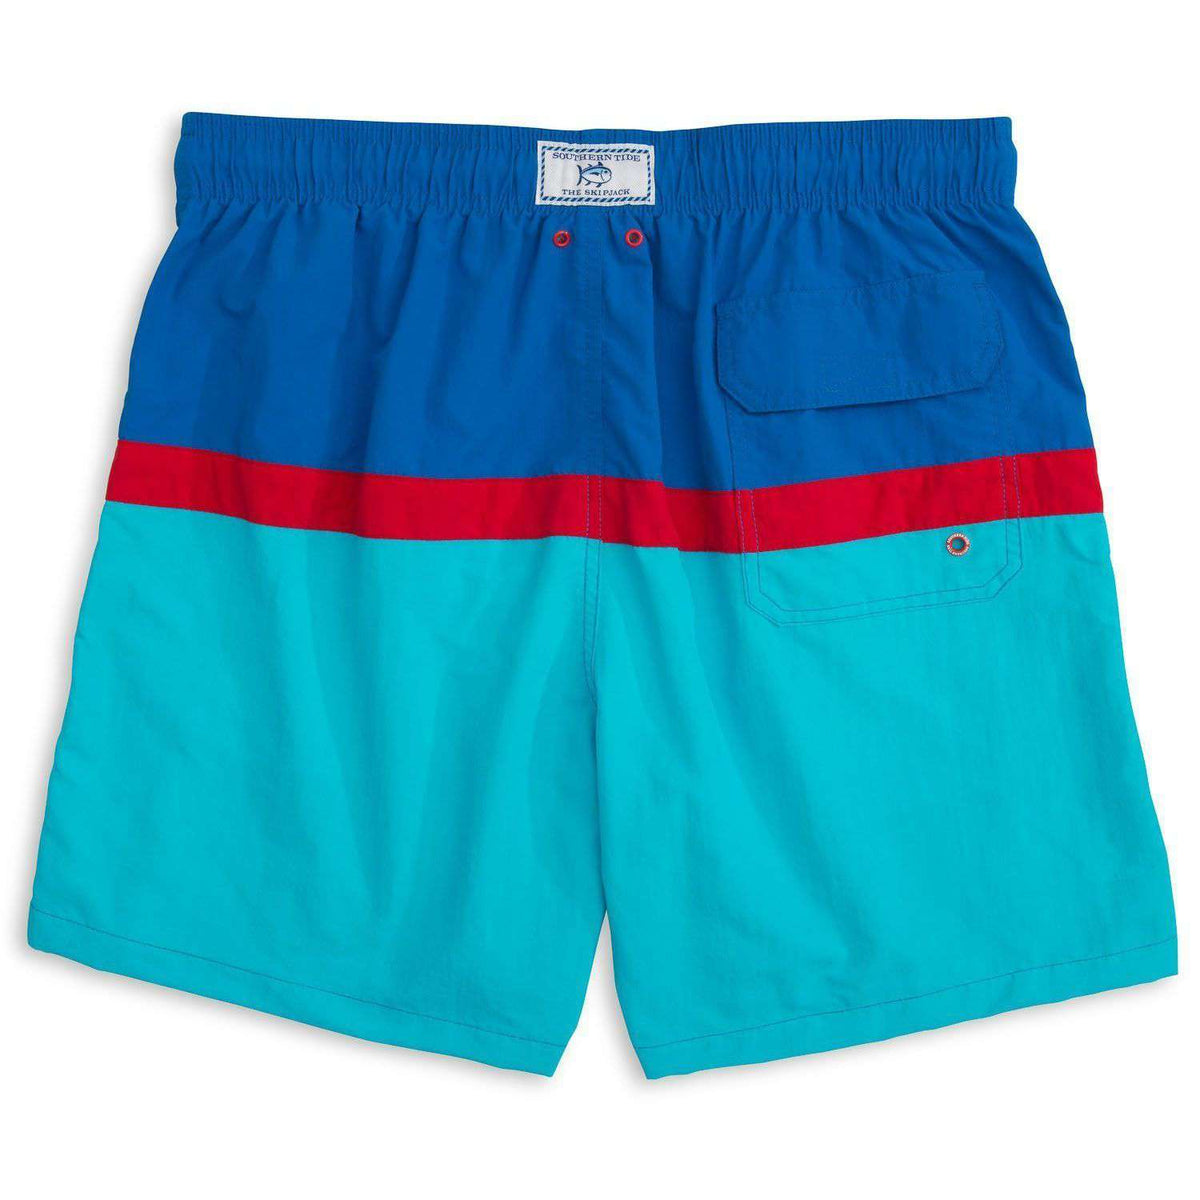 Color Block Swim Trunk in Royal Blue by Southern Tide - Country Club Prep